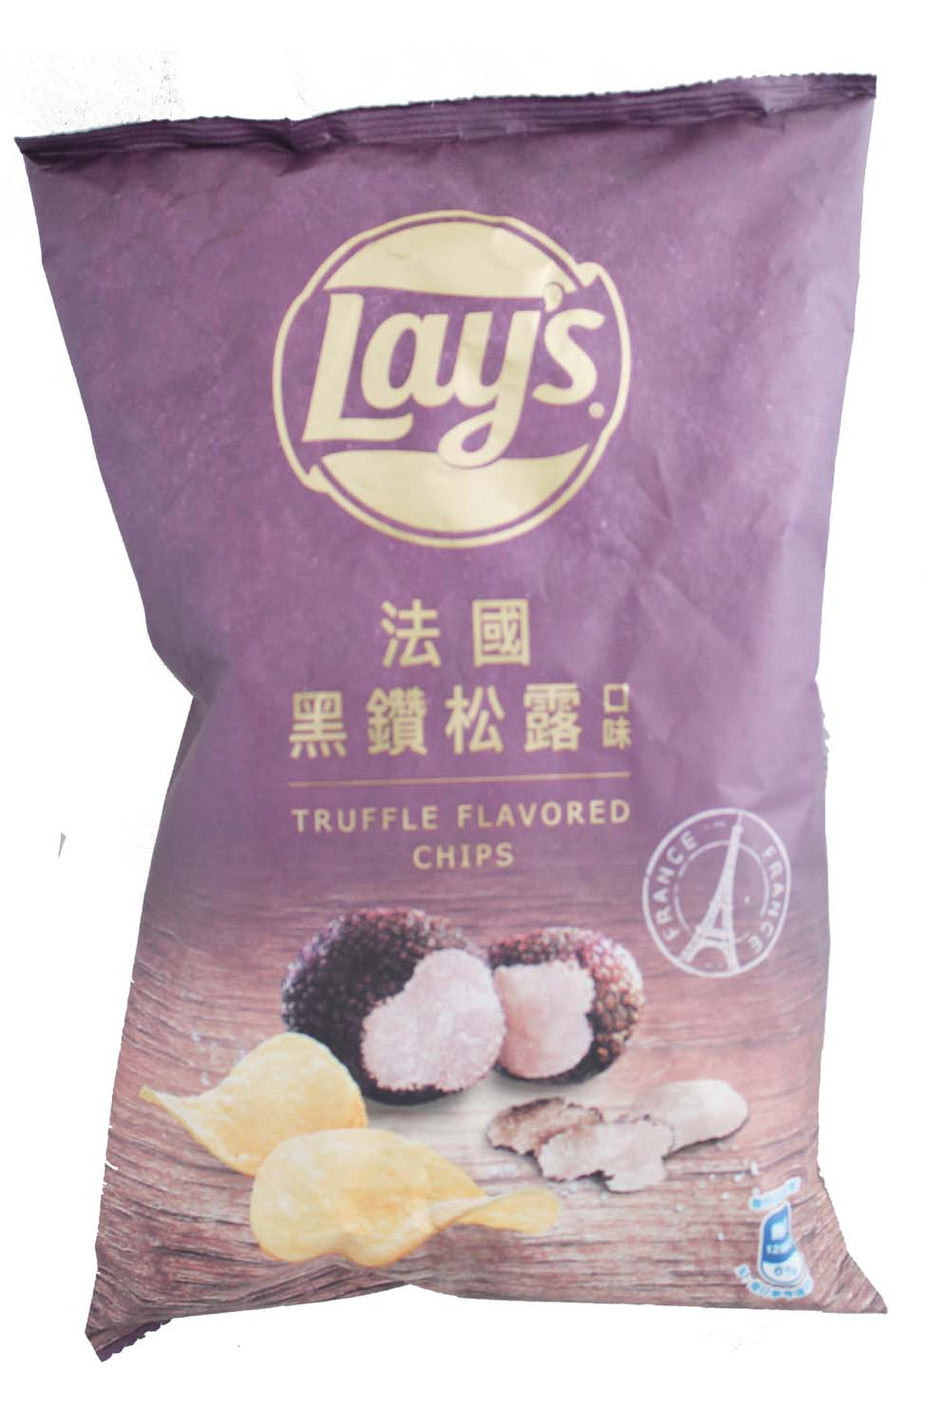 Lay's truffle Flavored Chips